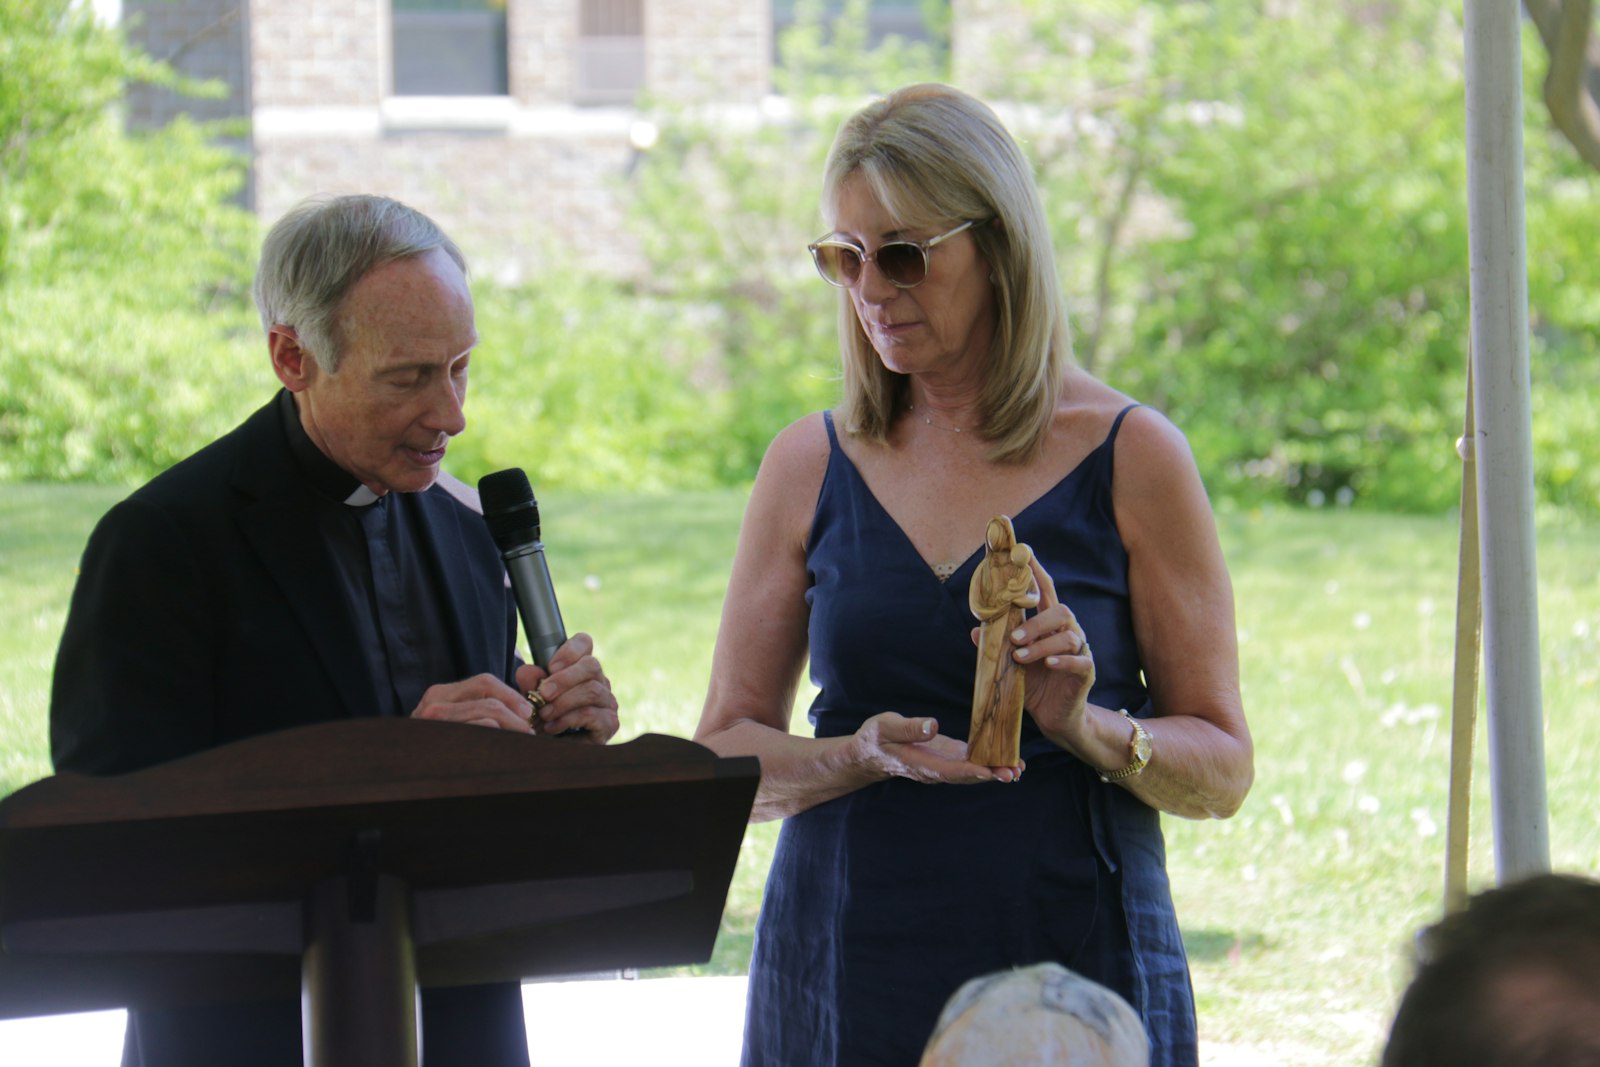 Msgr. John Zenz, chaplain of the Christ Child Society of Detroit, blesses a statue of Mary and the Child Jesus held by Mari MacKenzie of the Christ Child Society on May 15.